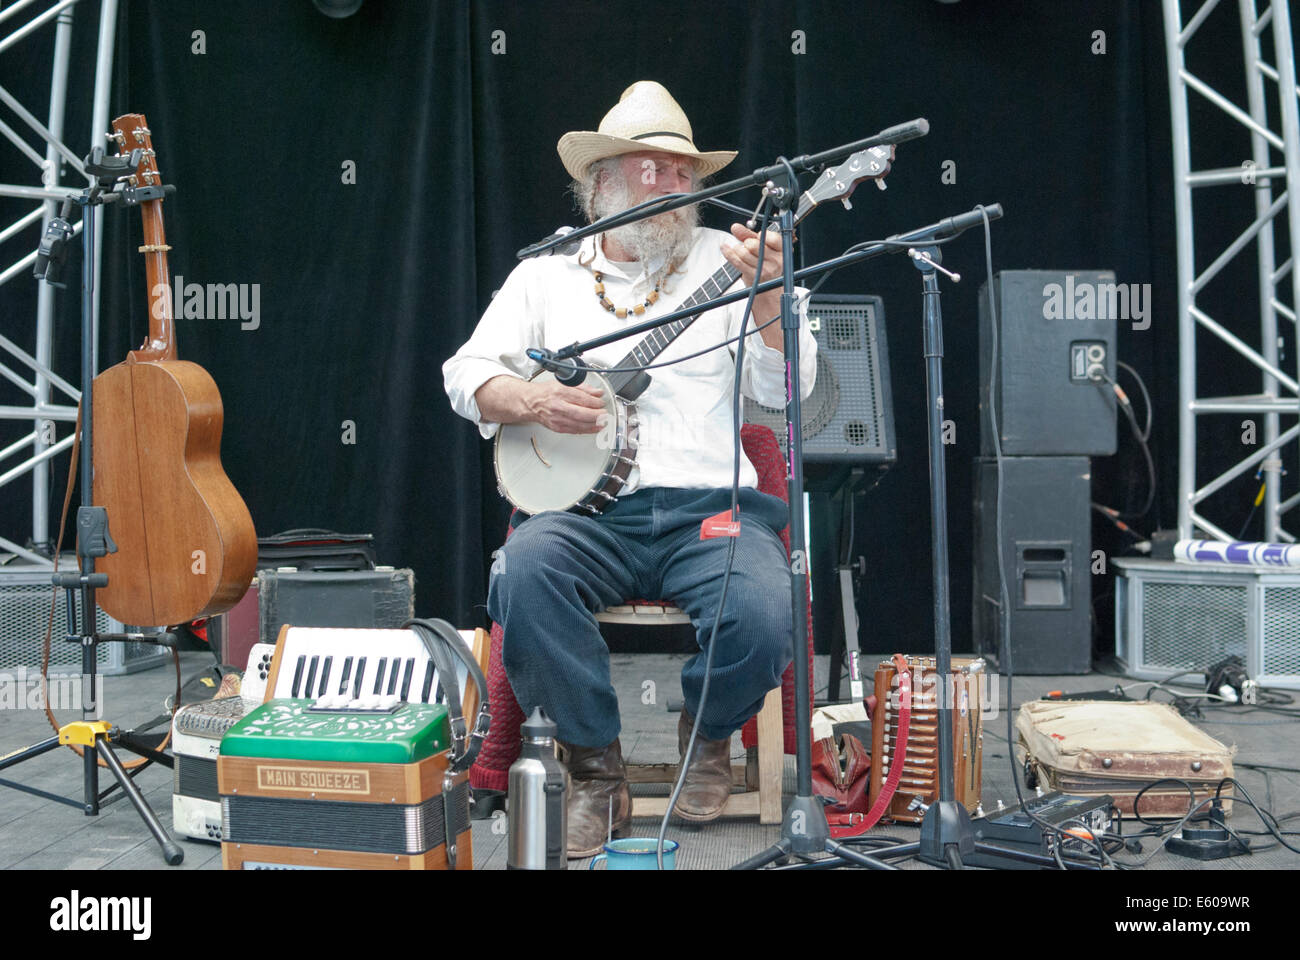 A local musician plays the banjo,accordions, and other instruments at the farmers market in Santa Fe. Stock Photo